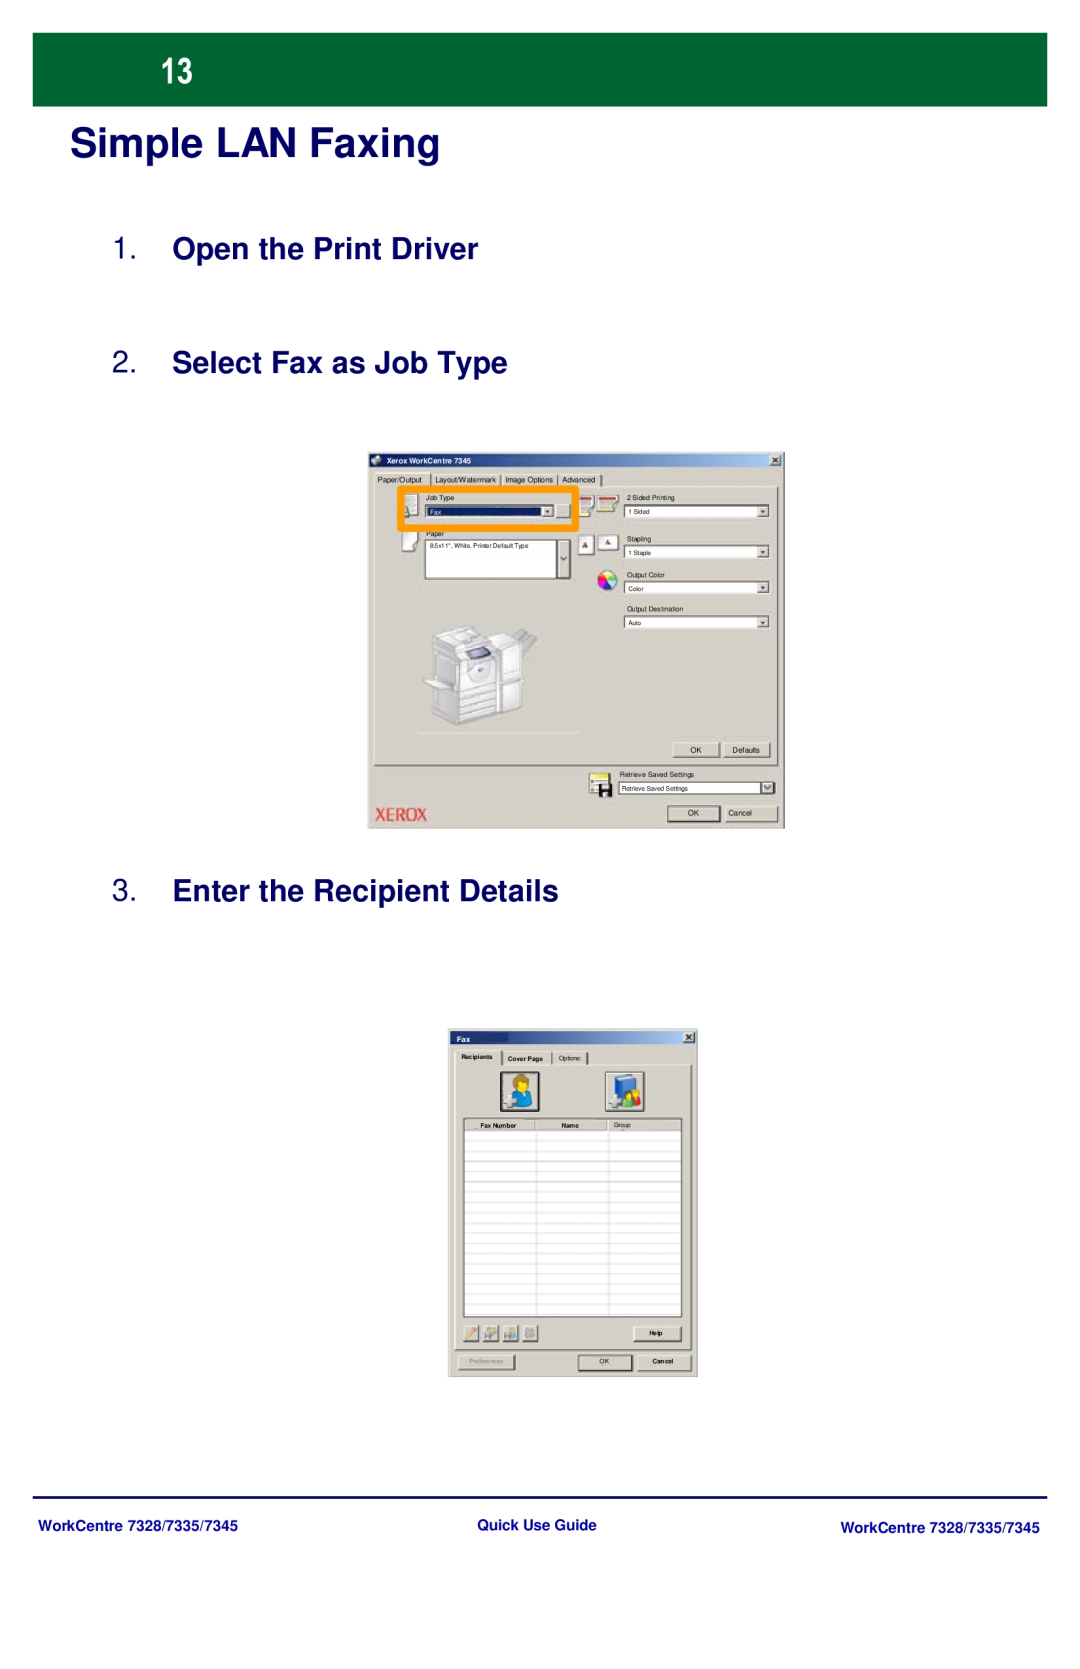 Xerox 7328 Simple LAN Faxing, Open the Print Driver 2.Select Fax as Job Type, Enter the Recipient Details, Quick Use Guide 